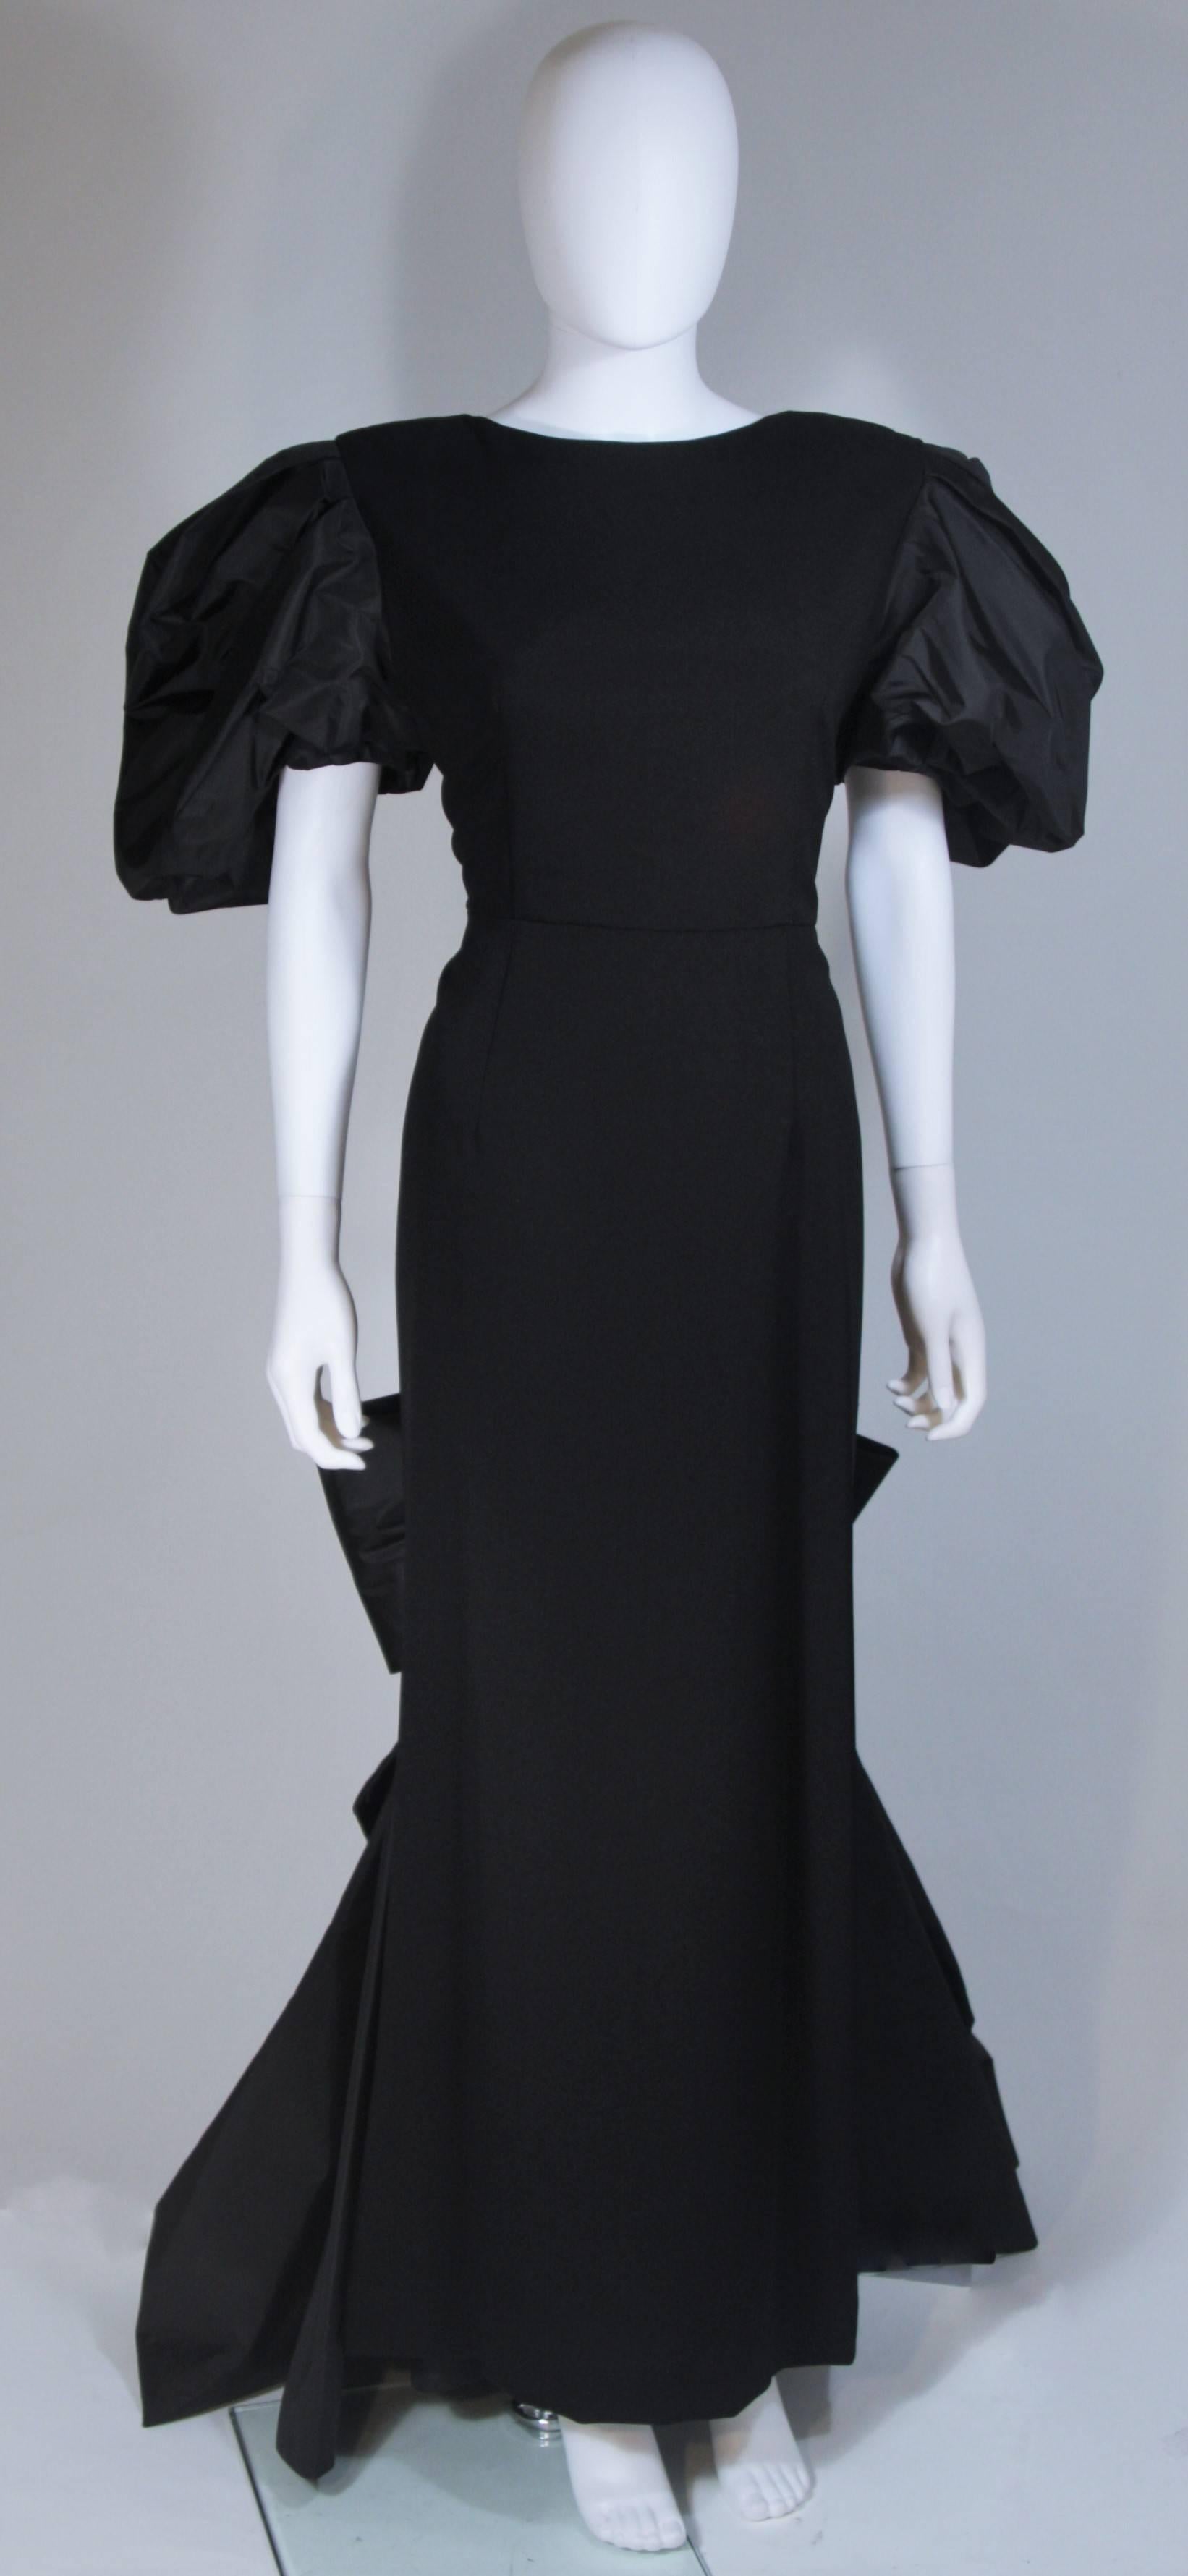  This Victor Costa gown is composed of a wool and silk taffeta contrast. Features large puff sleeves and bow at the center back skirt. There is a center back zipper and train. In excellent condition. 

**Please cross-reference measurements for